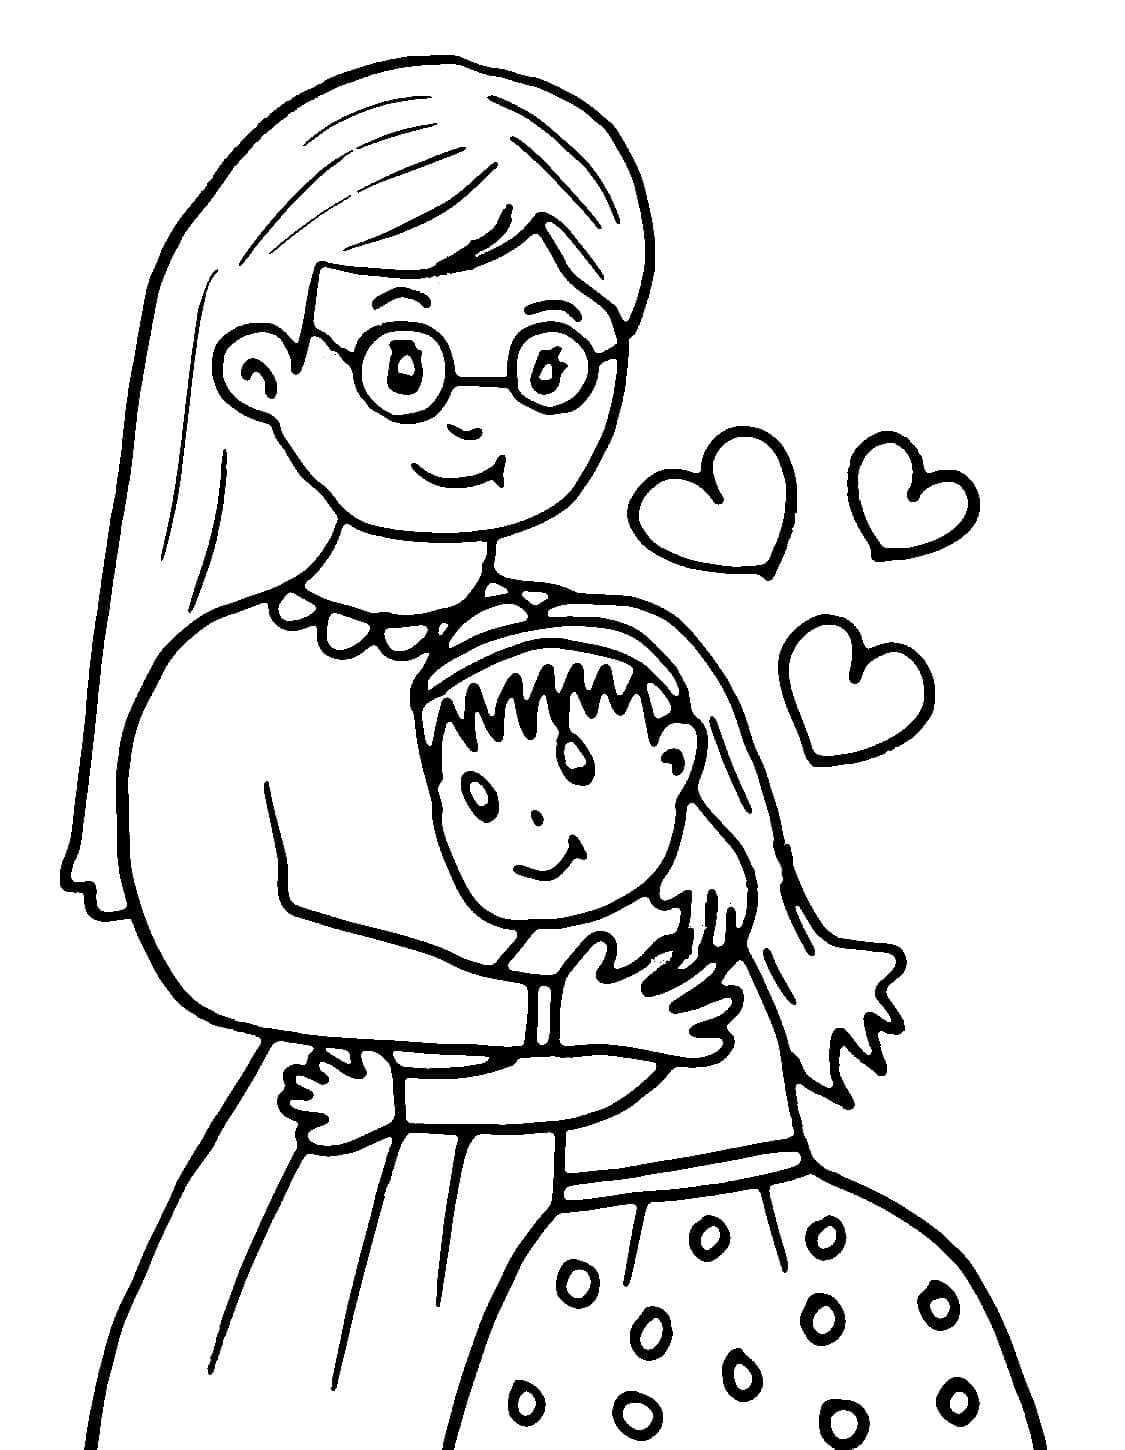 Maman Embrasse sa Fille coloring page